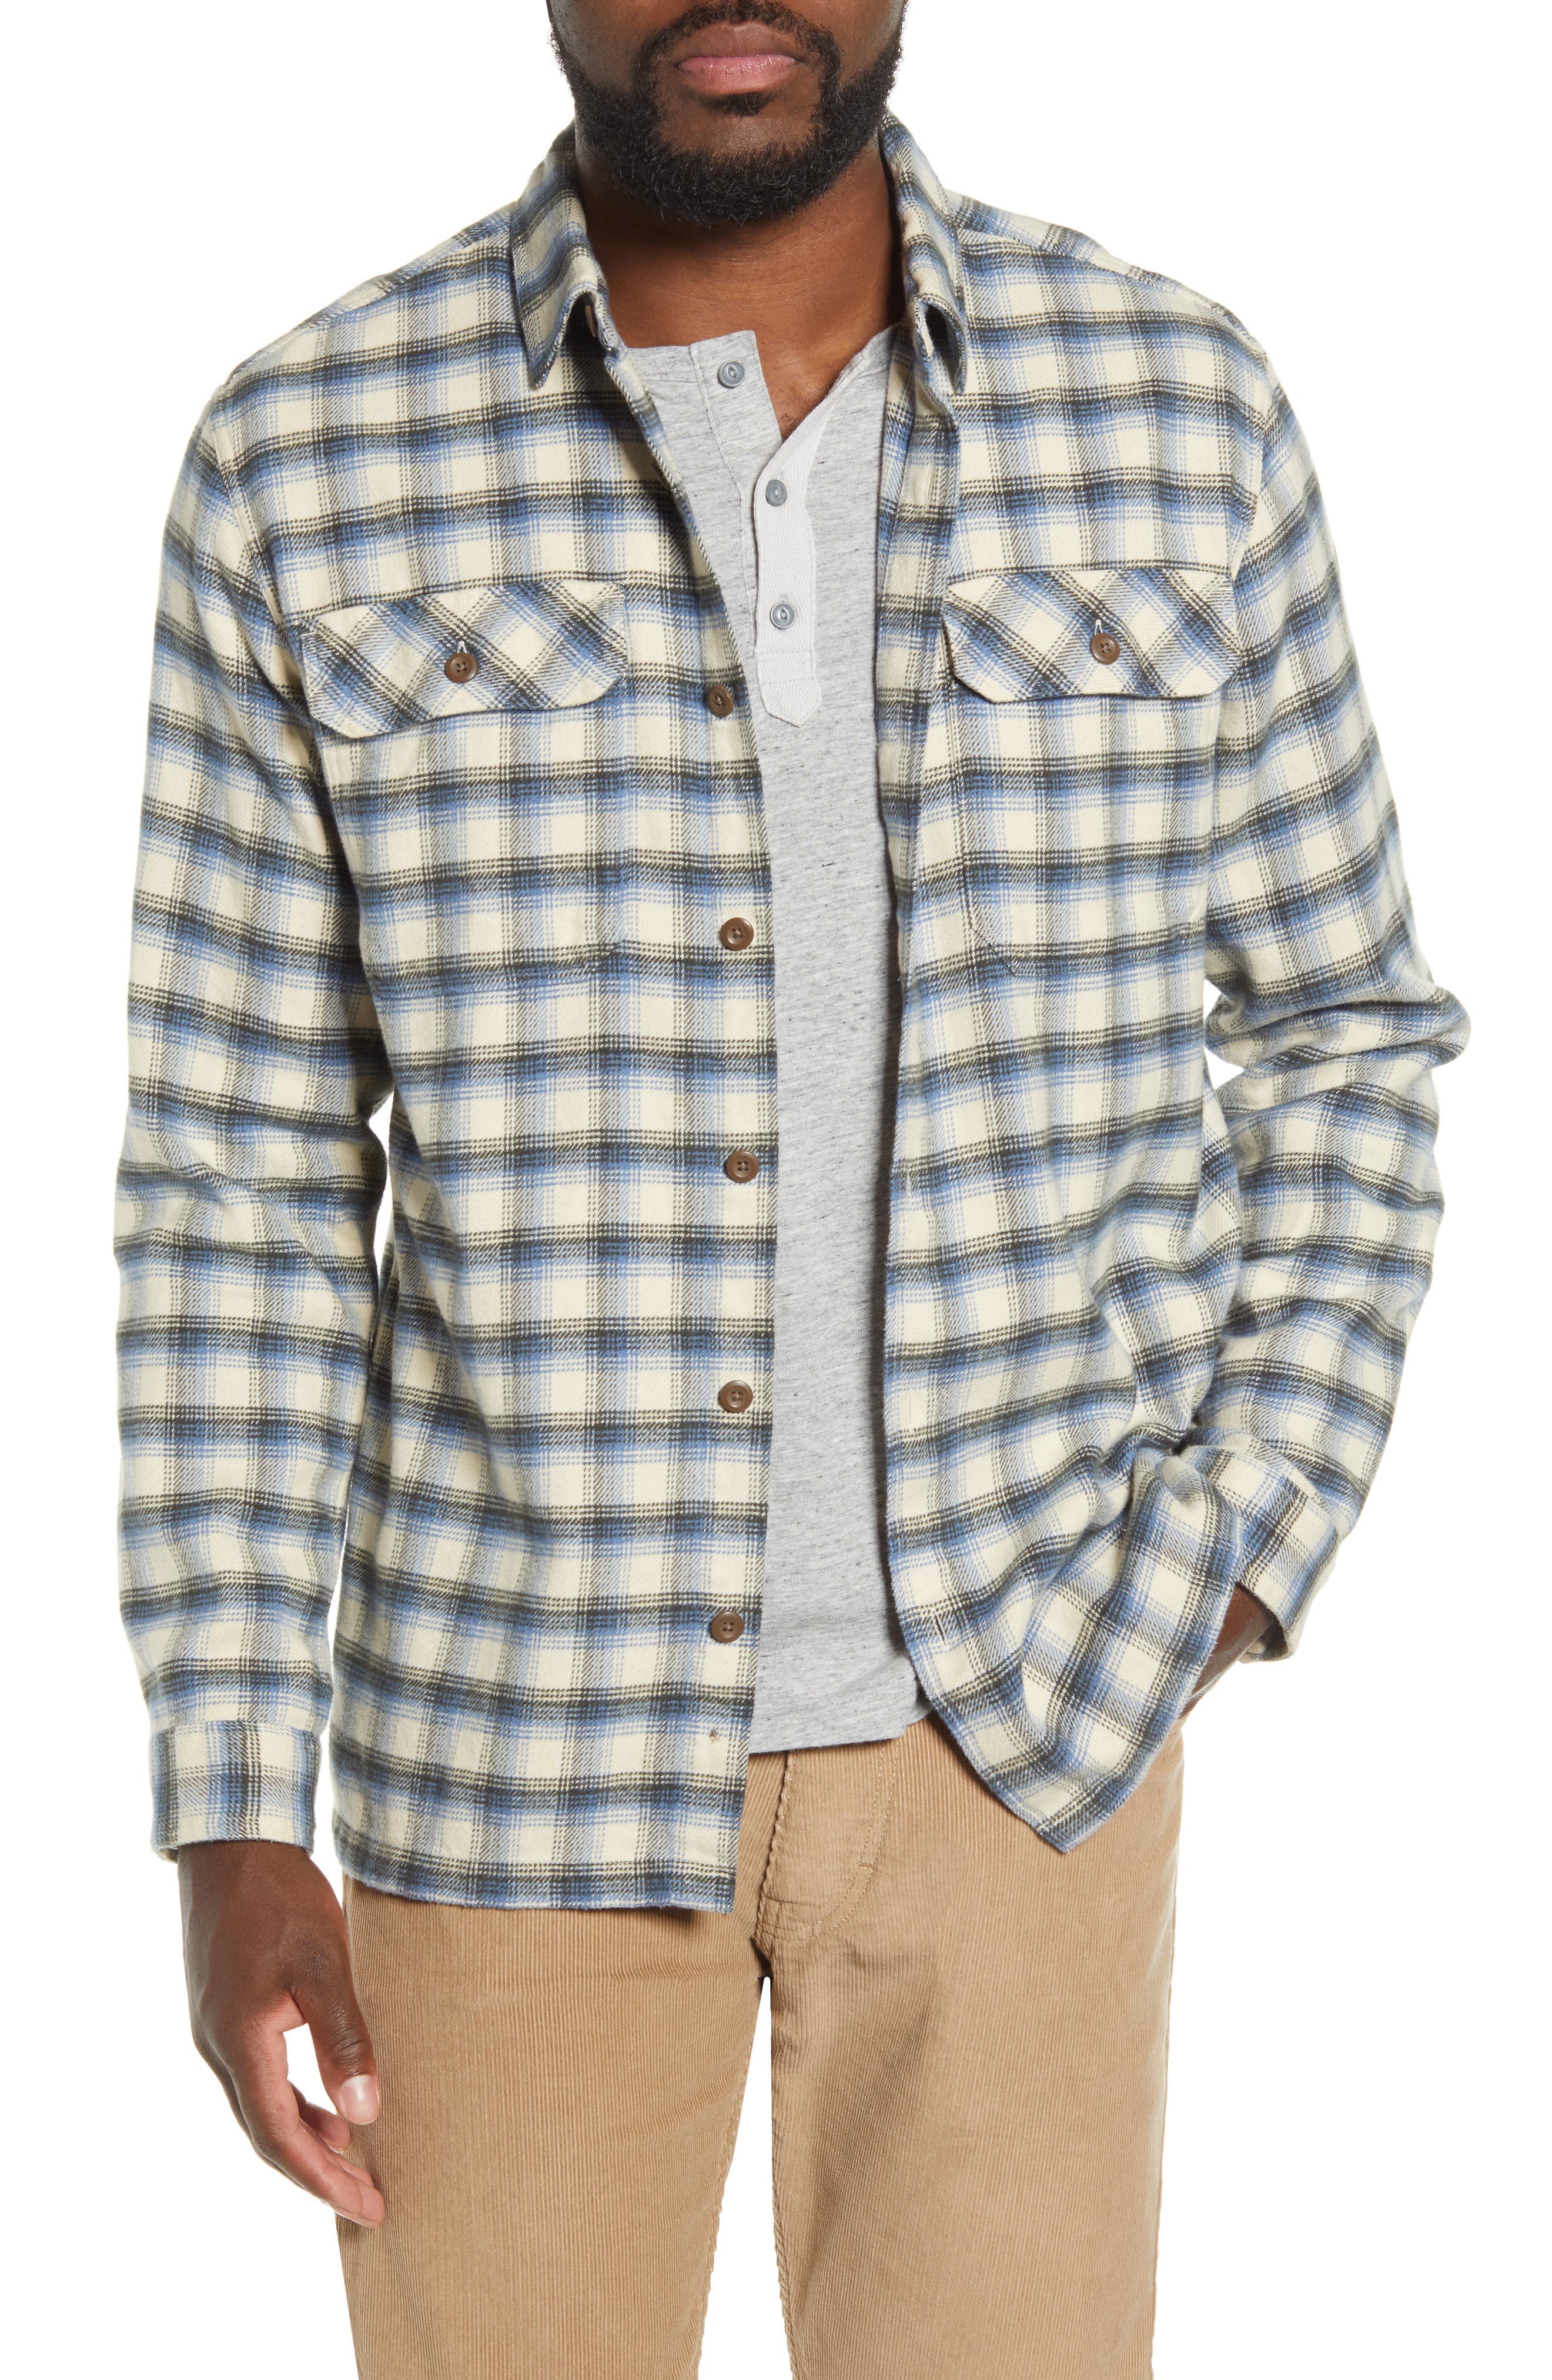 patagonia flannel